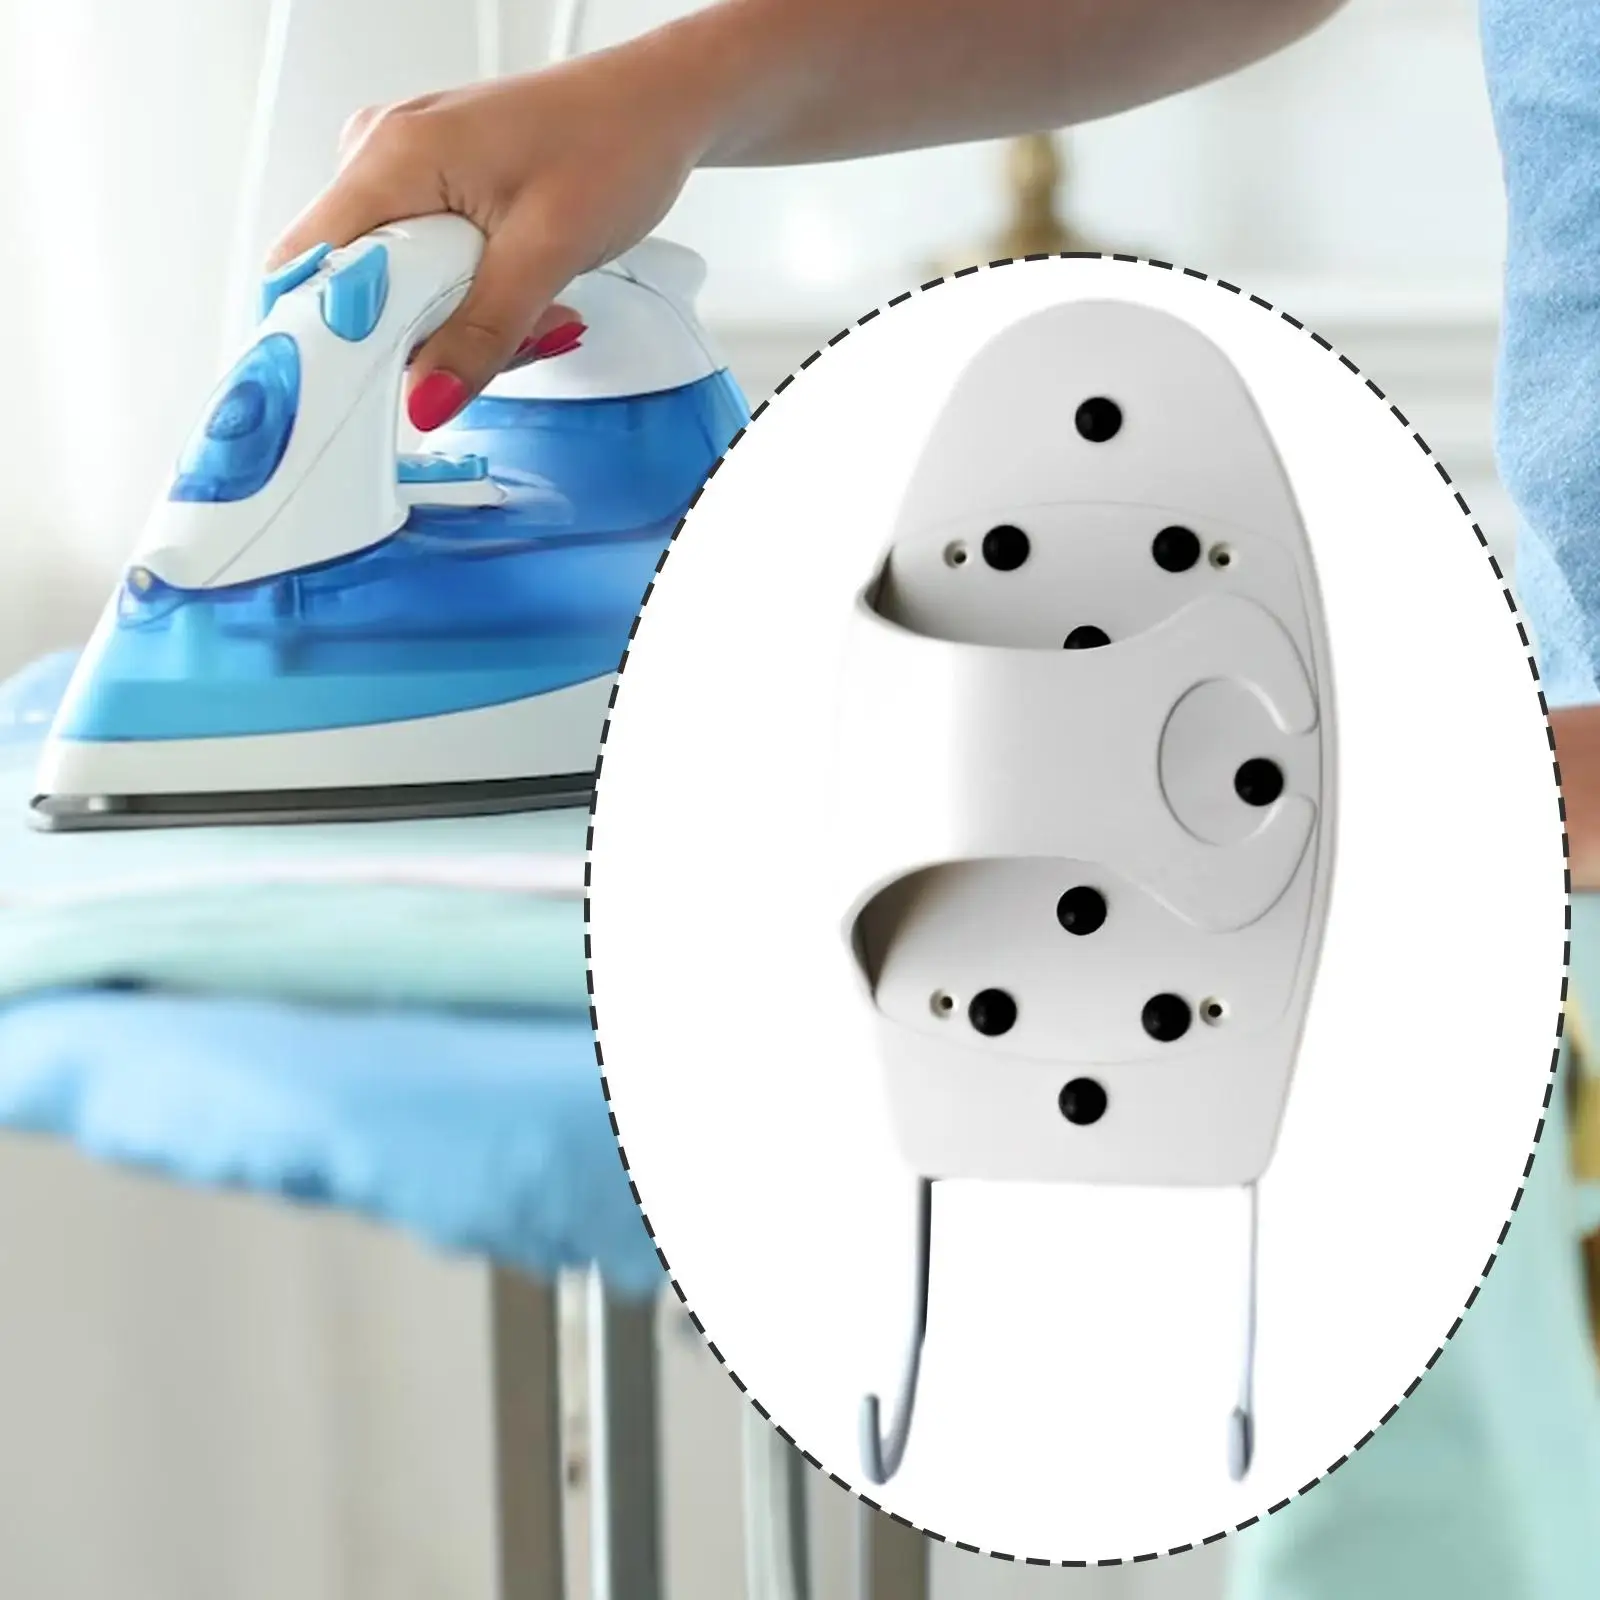 Ironing Board Holder Easy to Install with Hooks Organizer Compact Iron Hanger for Laundry Room Door Household Cabinet Bathroom